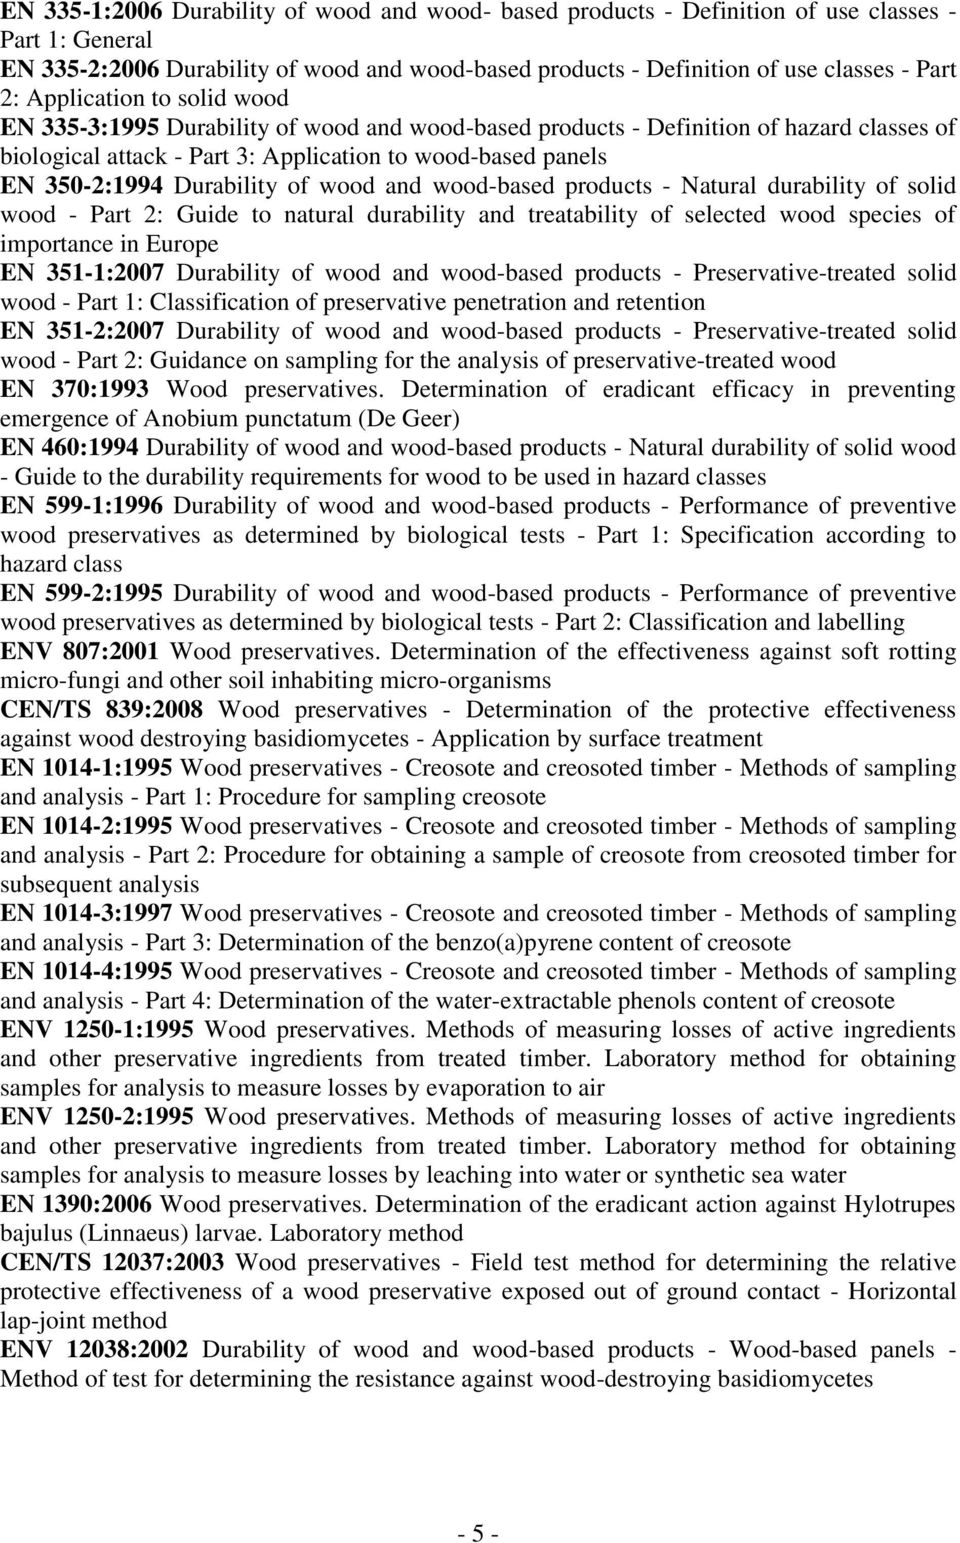 Durability of wood and wood-based products - Natural durability of solid wood - Part 2: Guide to natural durability and treatability of selected wood species of importance in Europe EN 351-1:2007